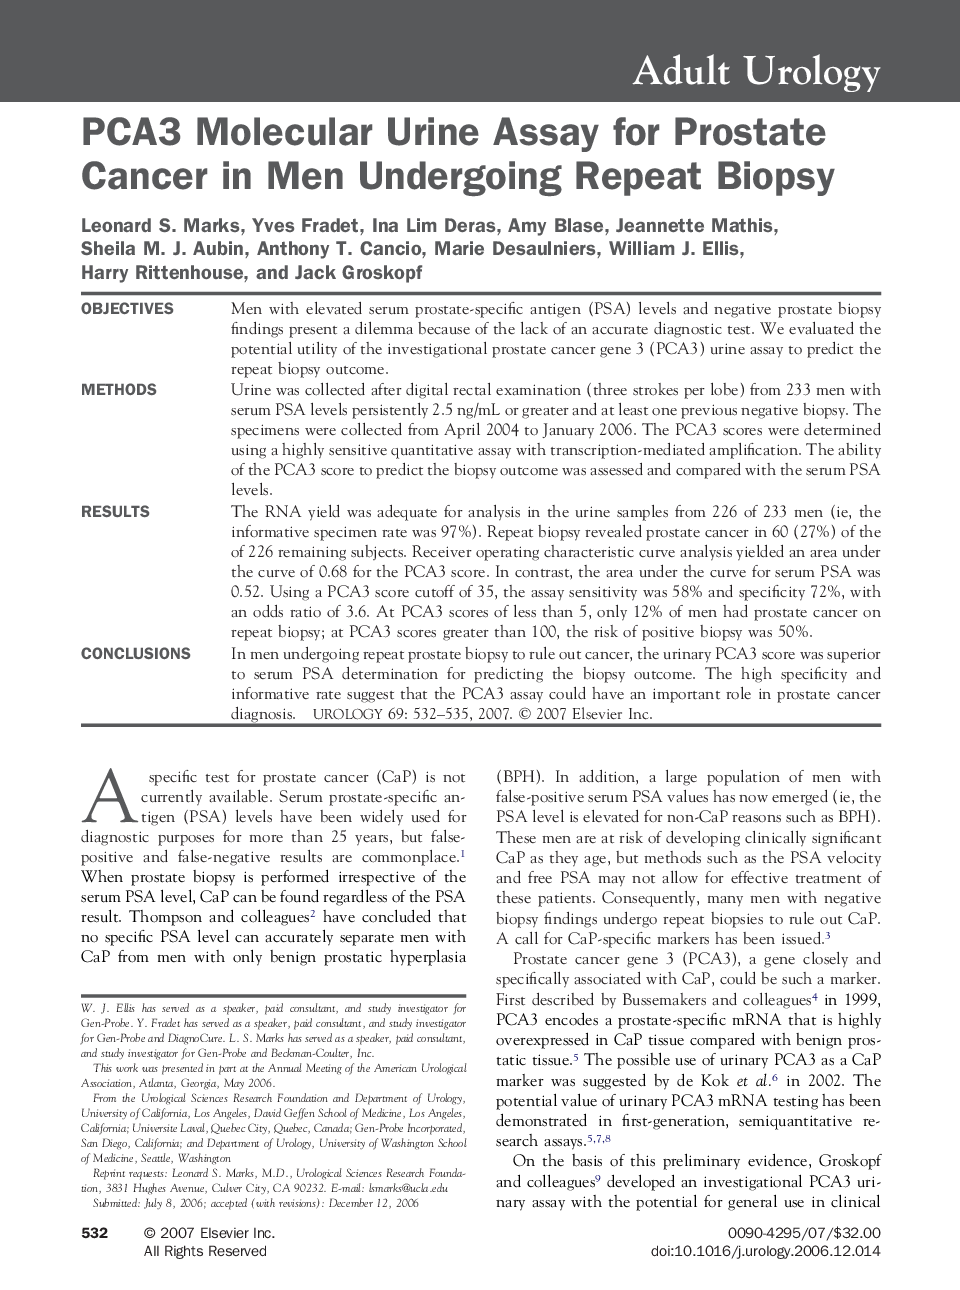 PCA3 Molecular Urine Assay for Prostate Cancer in Men Undergoing Repeat Biopsy